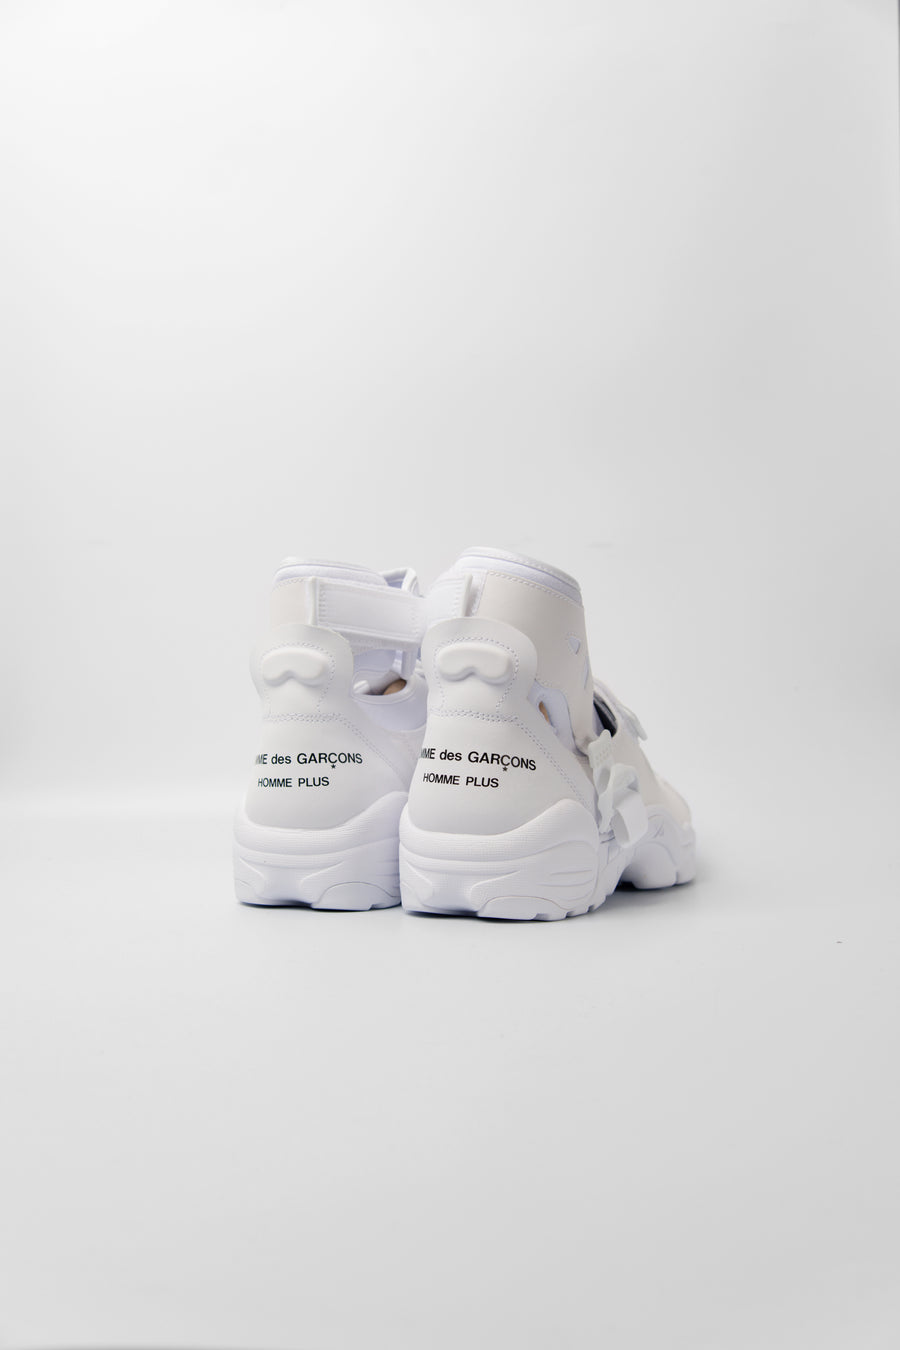 CDG Homme Plus Carnivore White DH0199-100 (LAUNCH PRODUCT)